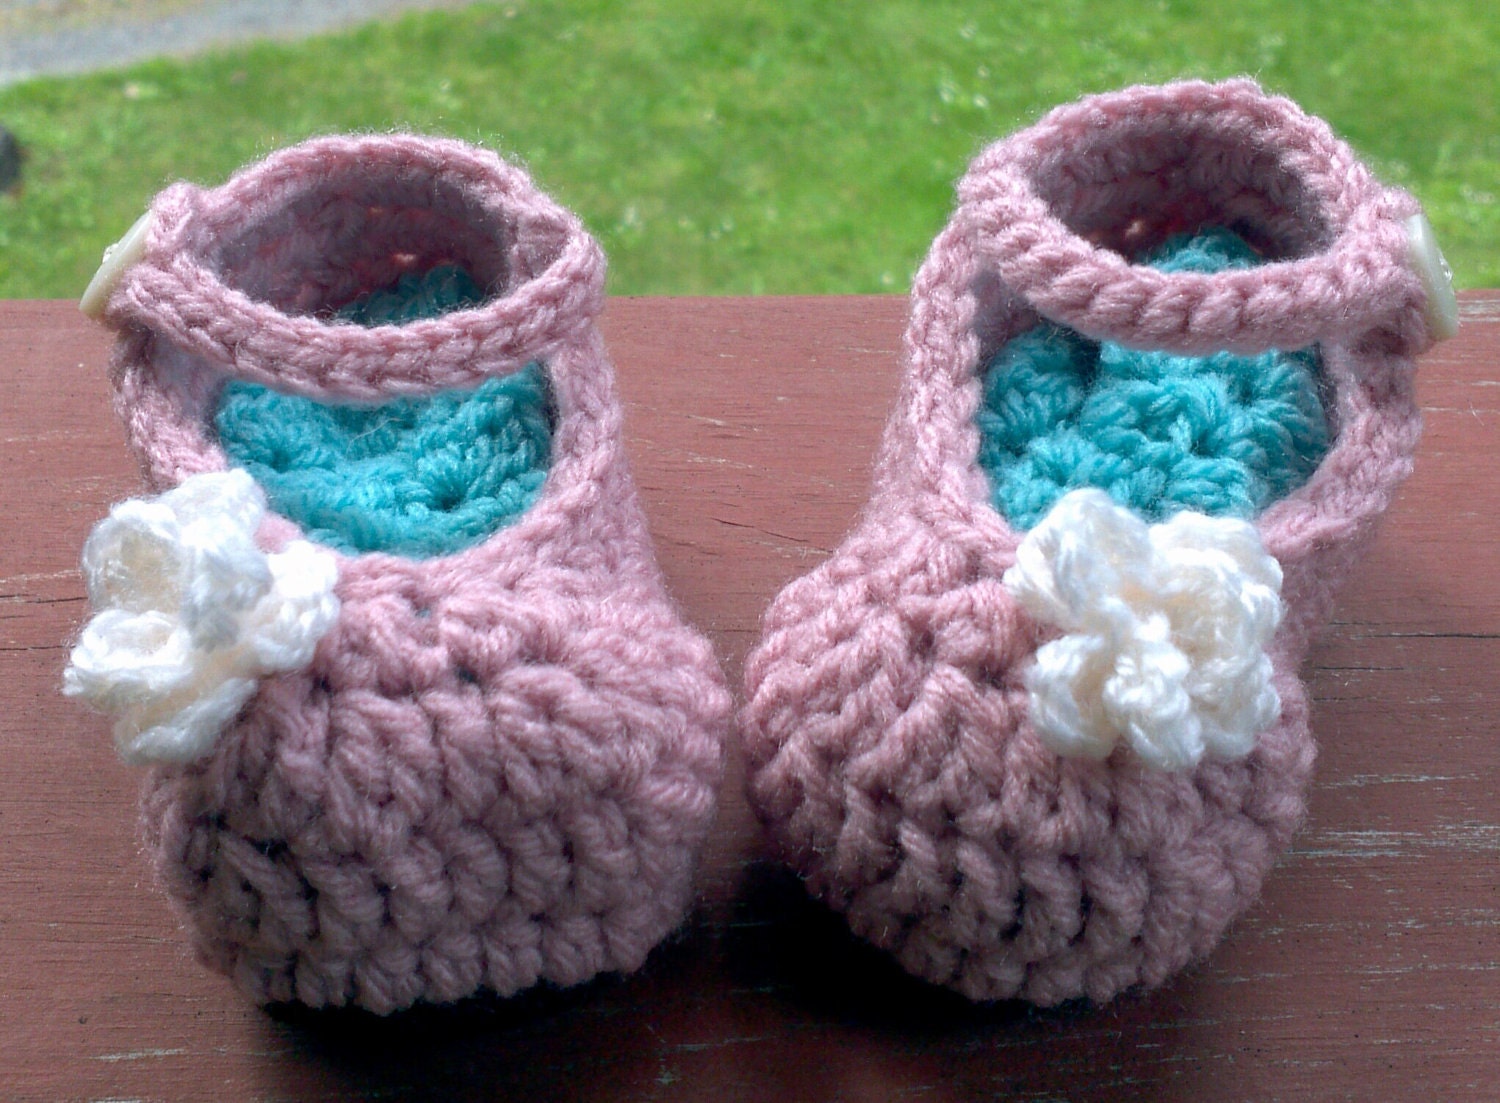 Baby Mary Jane Shoes / Slipper Bootie - NB to 6 months - ready to ship Pink and Brown Crochet